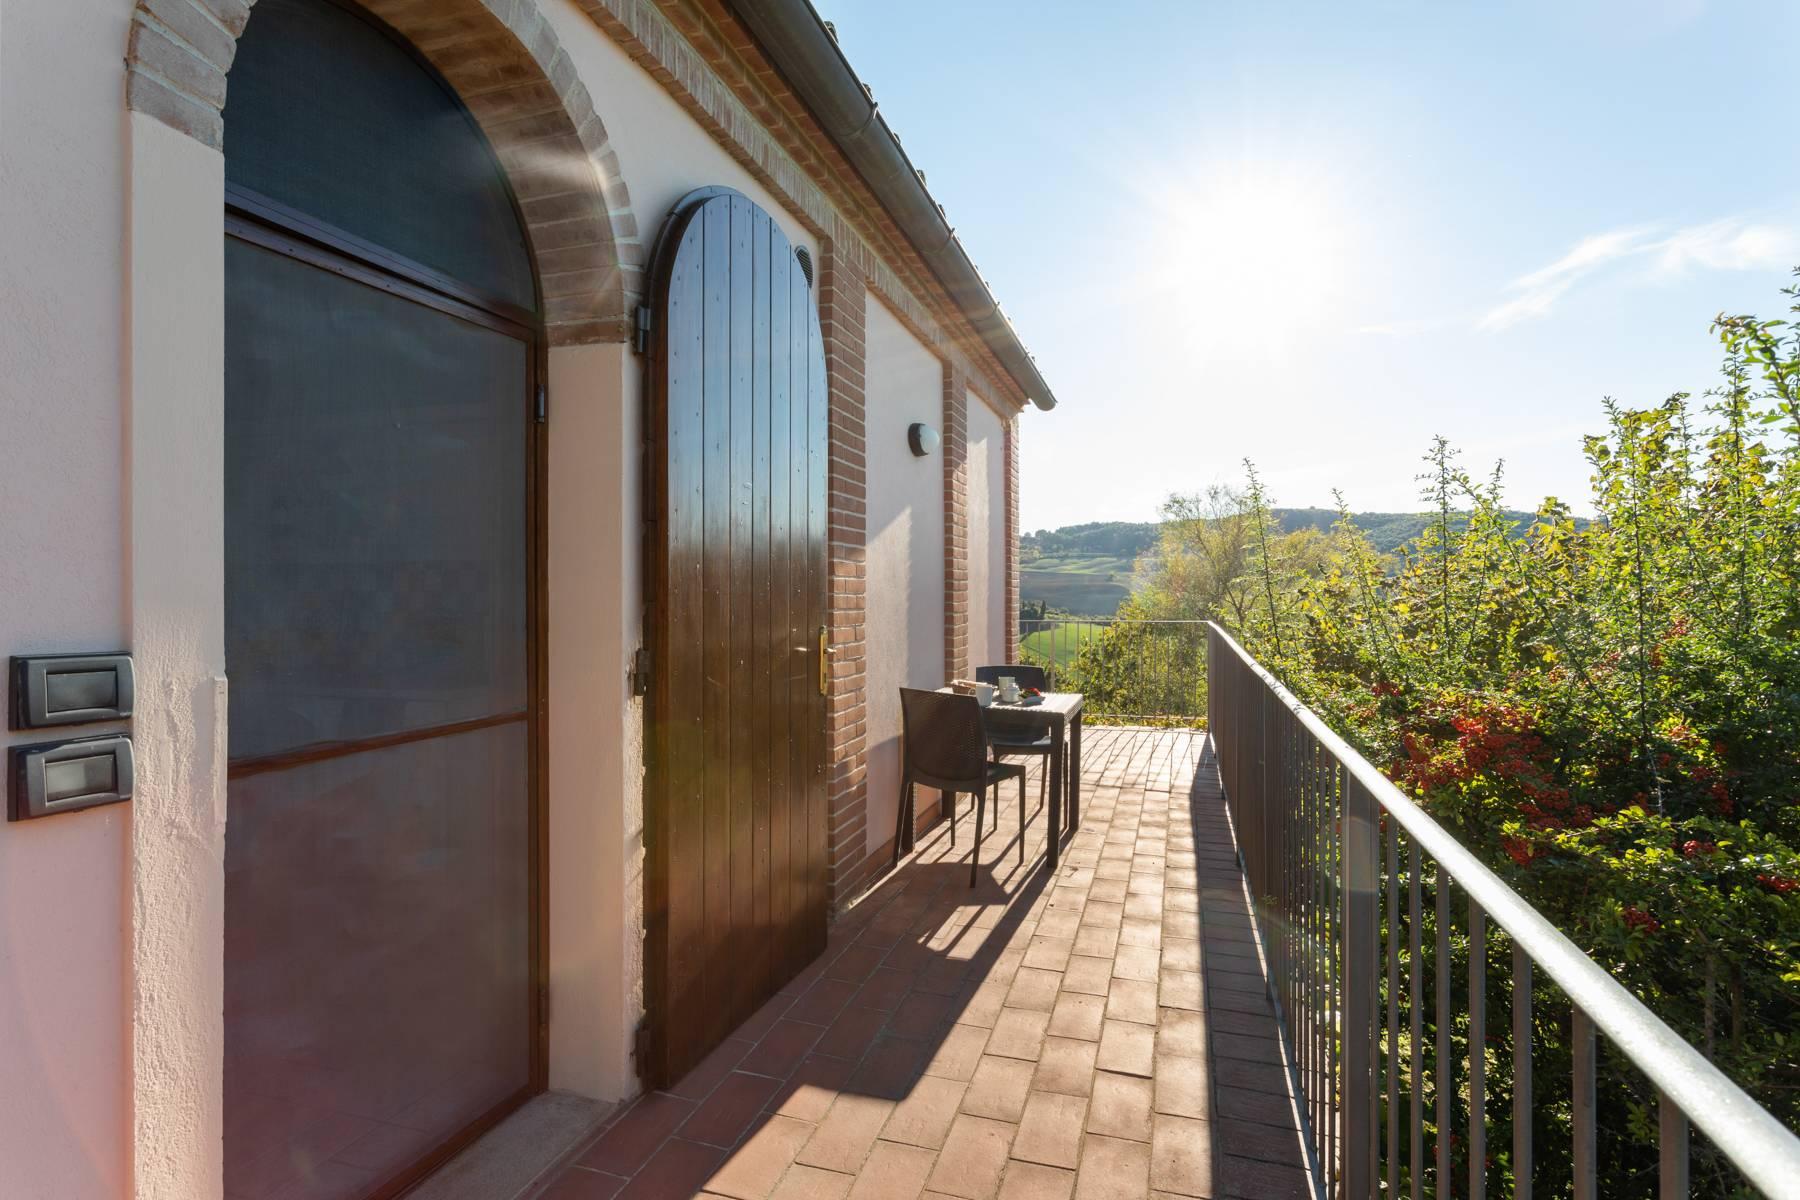 Beautiful country house with agriturismo and vineyard walking distance from Montepulciano - 10